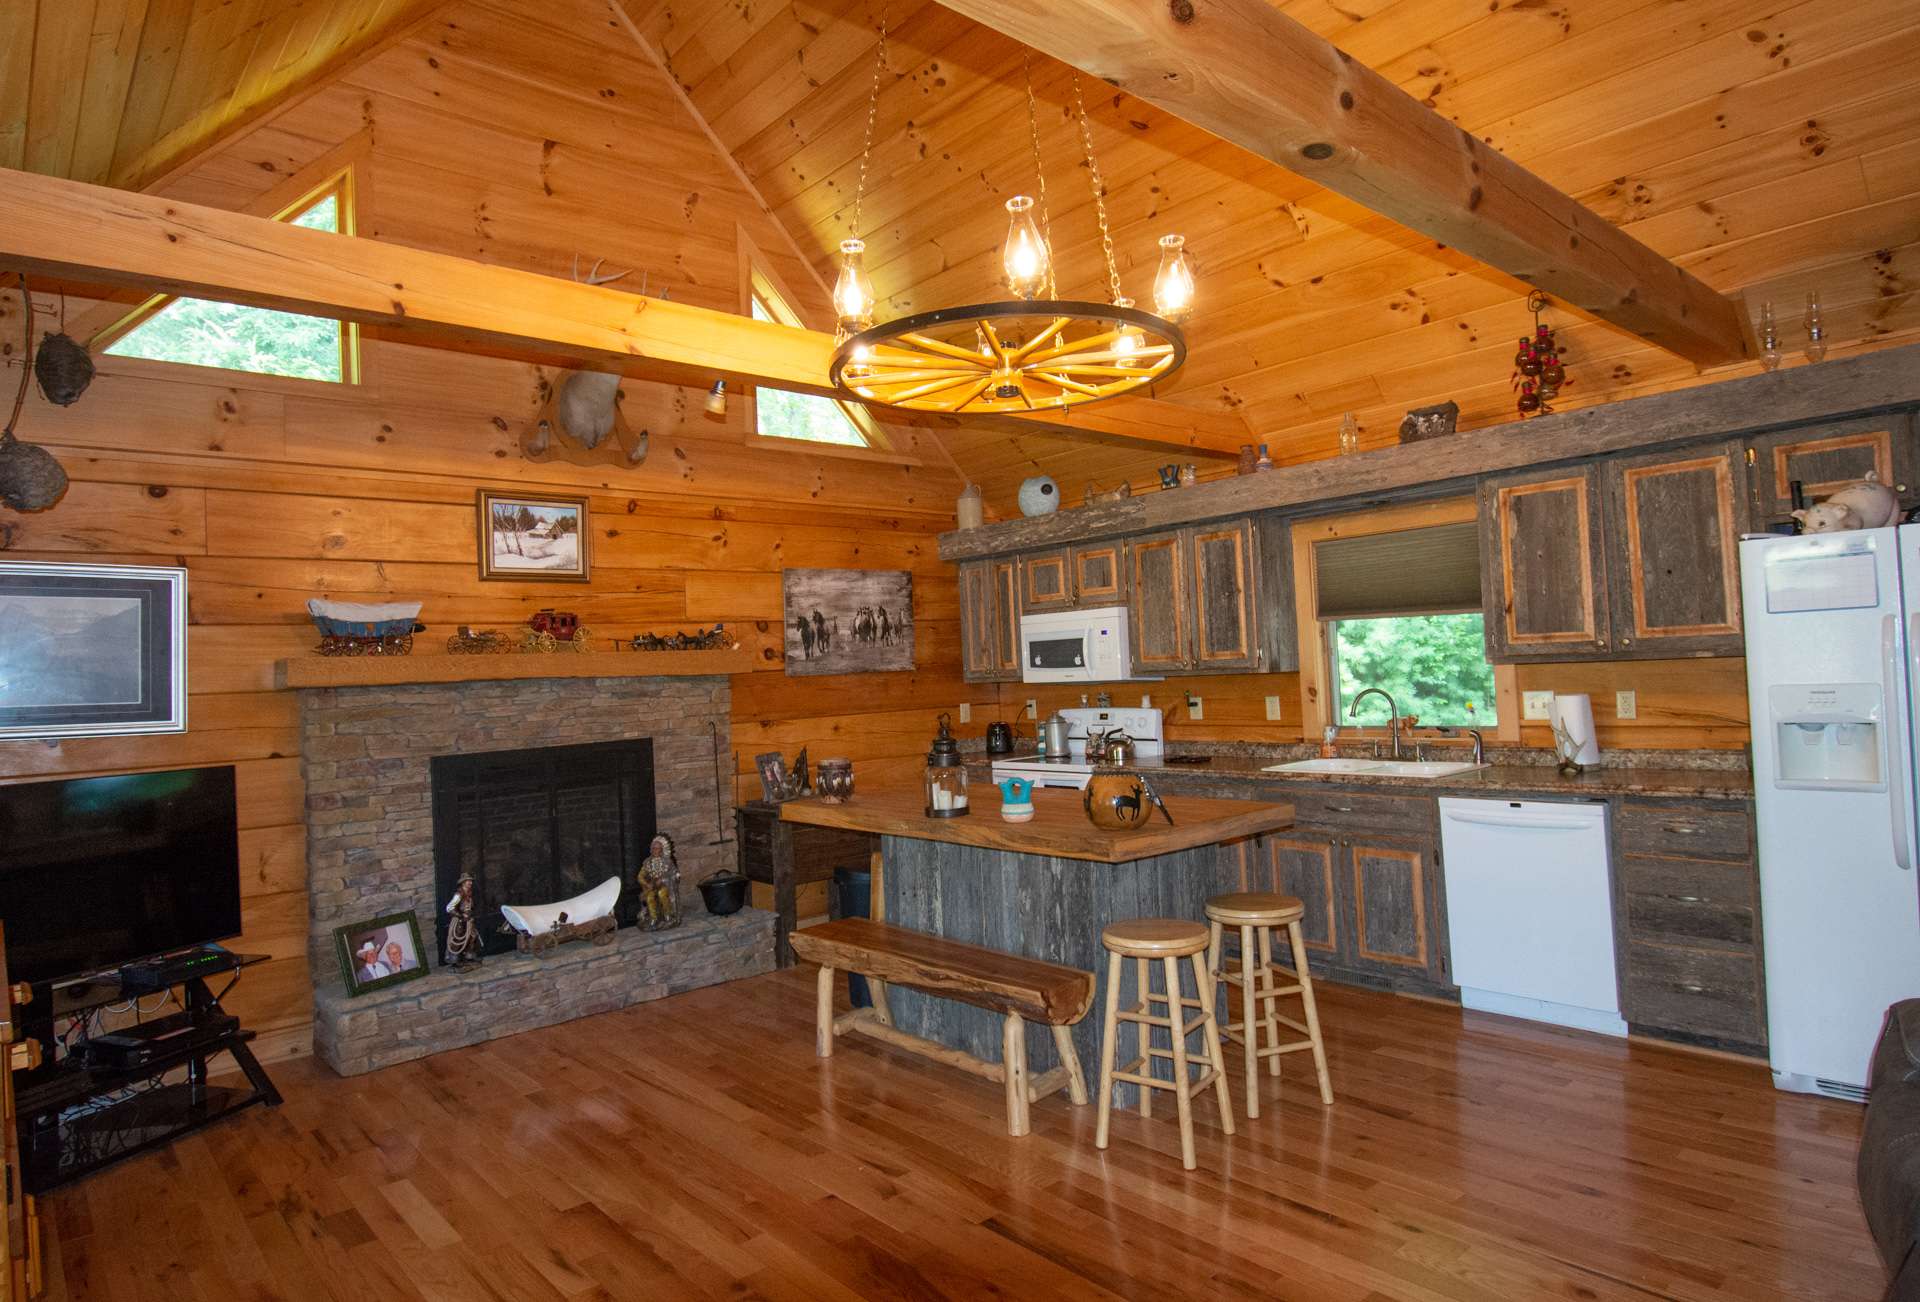 Features include a spacious vaulted great room with wood floors, exposed beams, stone fireplace with gas logs, and...